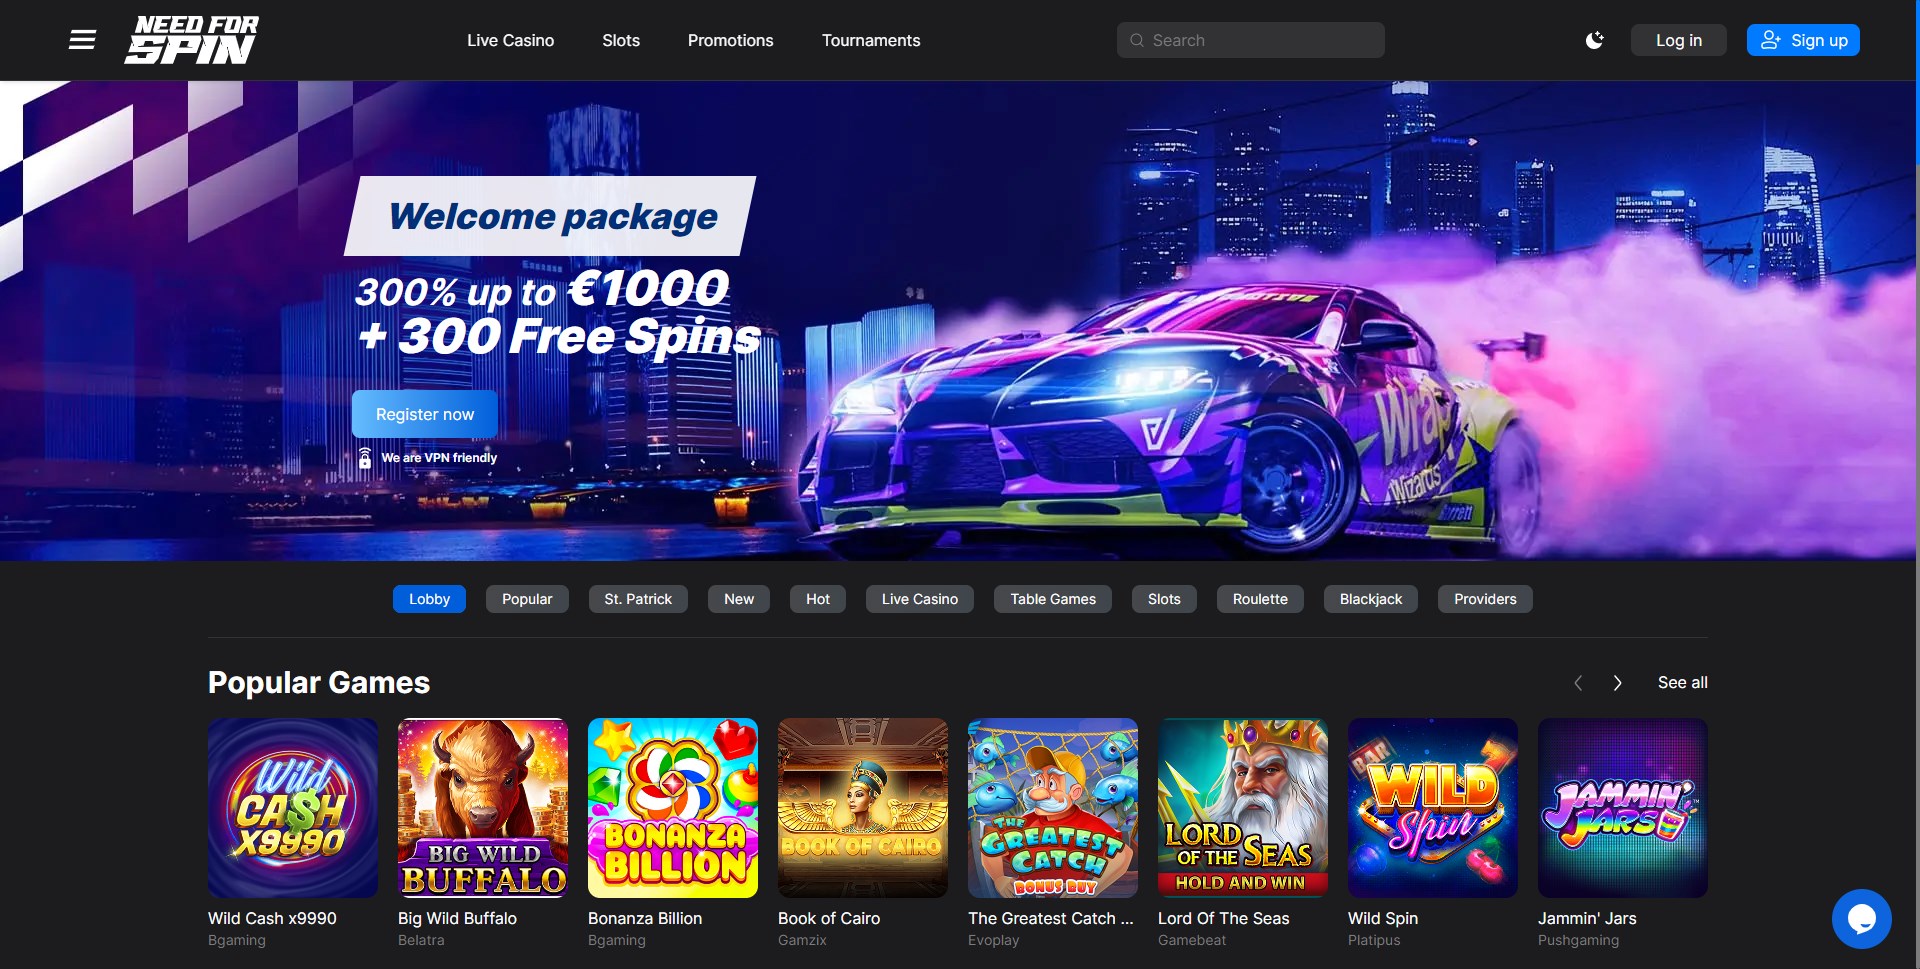 Need For Spin Online Casino